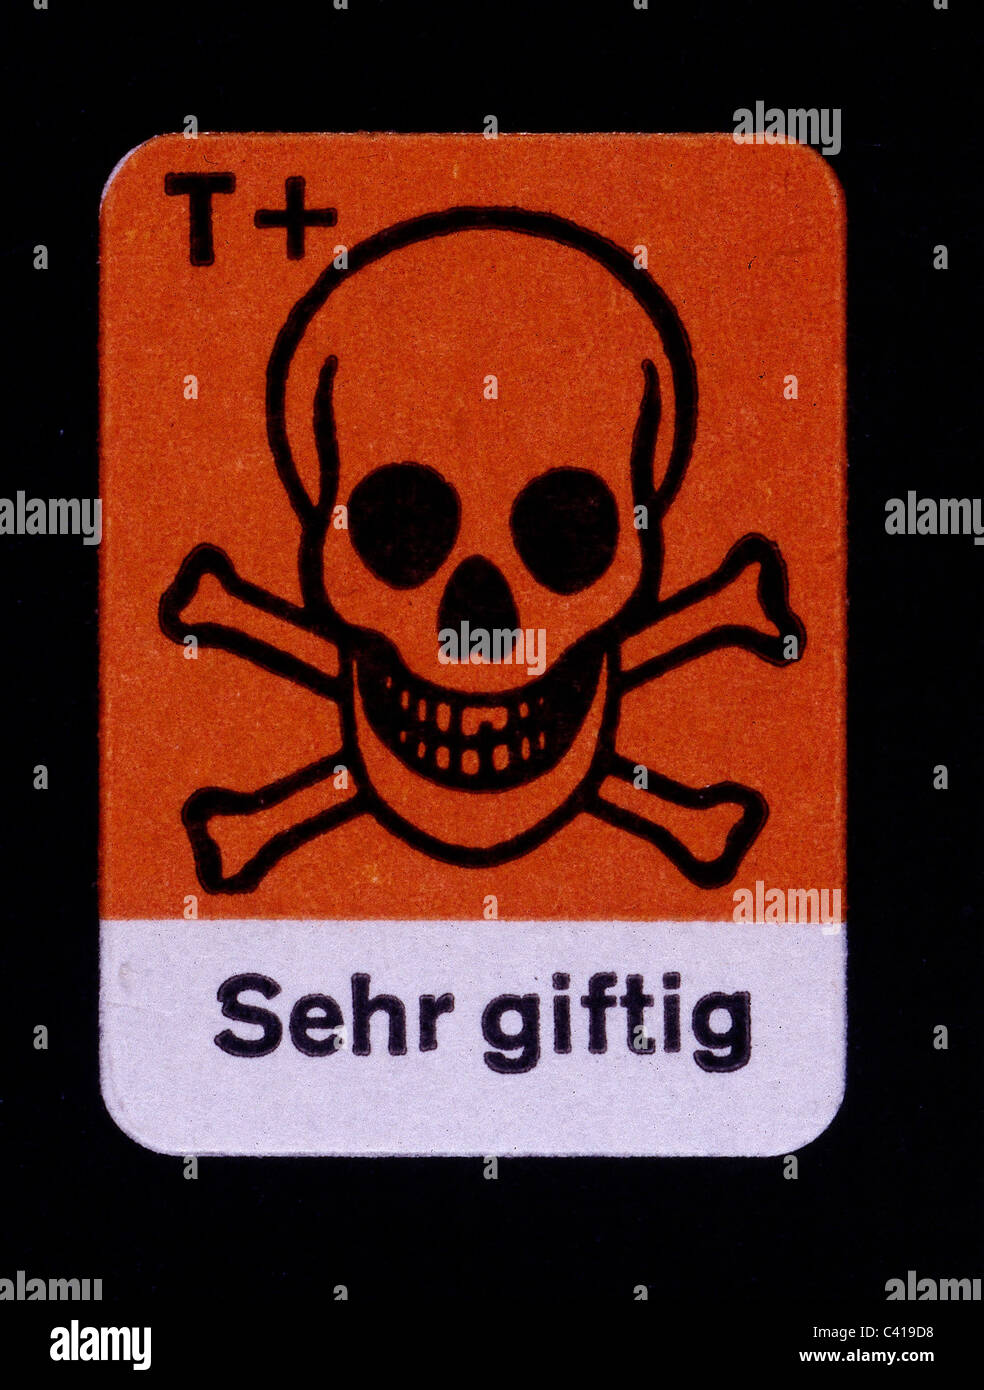 medicine, pharmacy, symbol, 'Sehr giftig' (Very toxic), orange / white, danger, dangers, clipping, cut out, cut-out, cut-outs, h Stock Photo